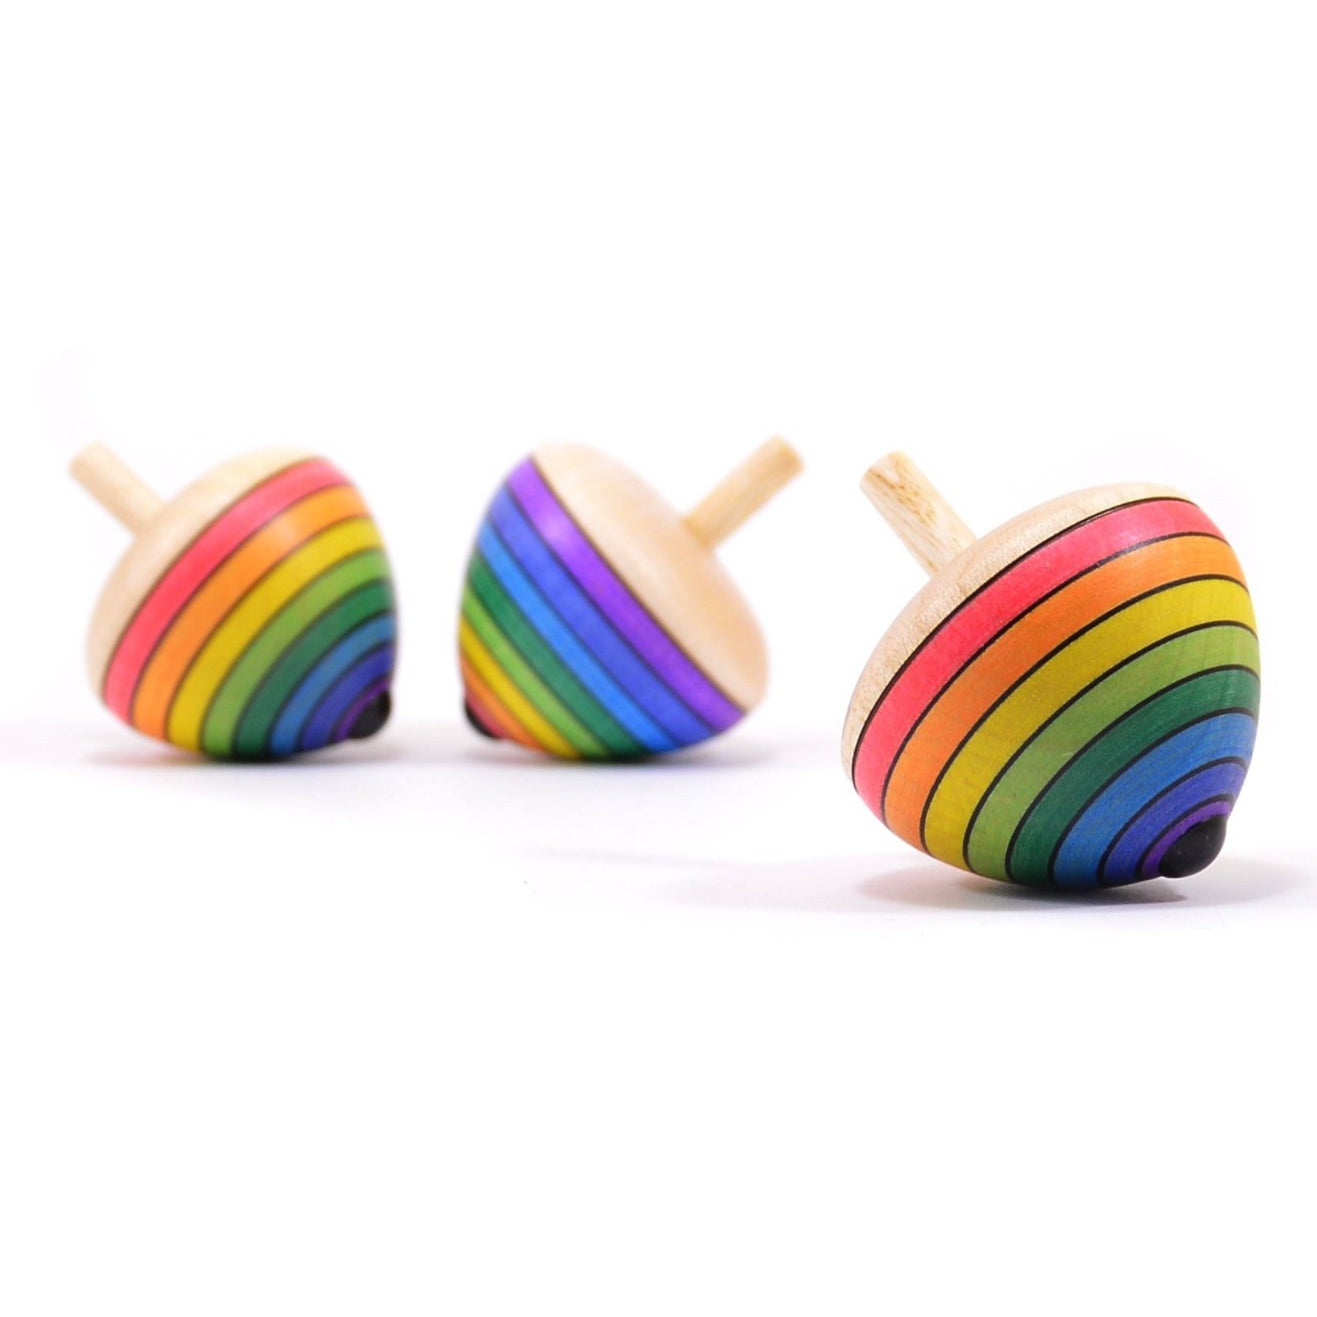 Rainbow Egg Spinning Top by Mader